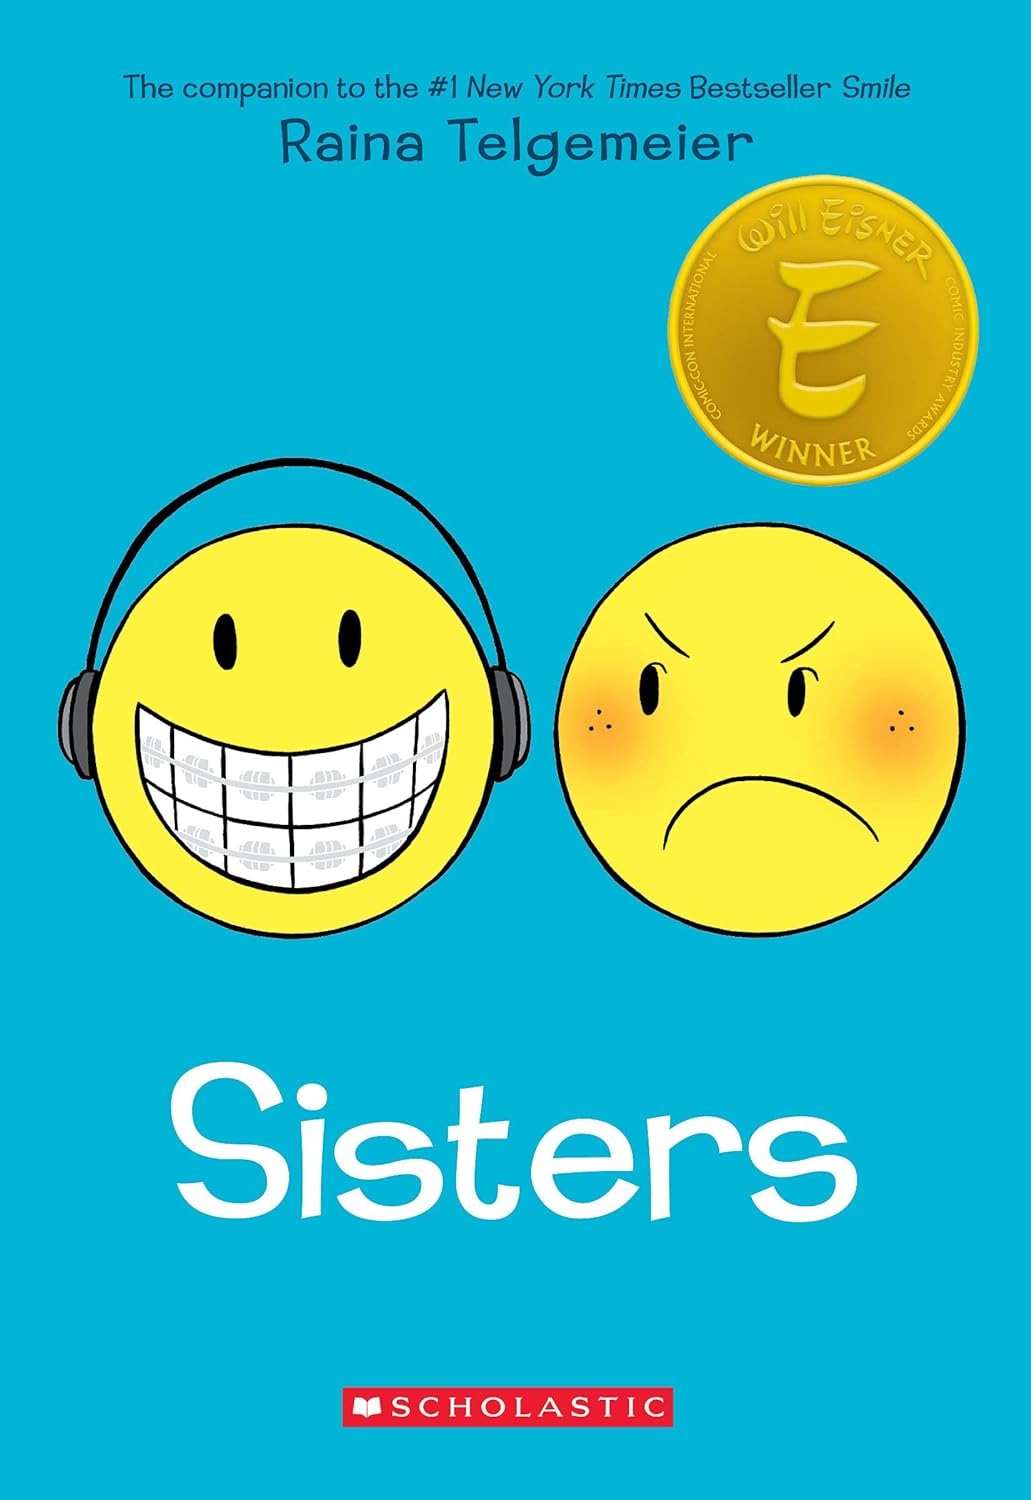 Sisters, a graphic novel for kids